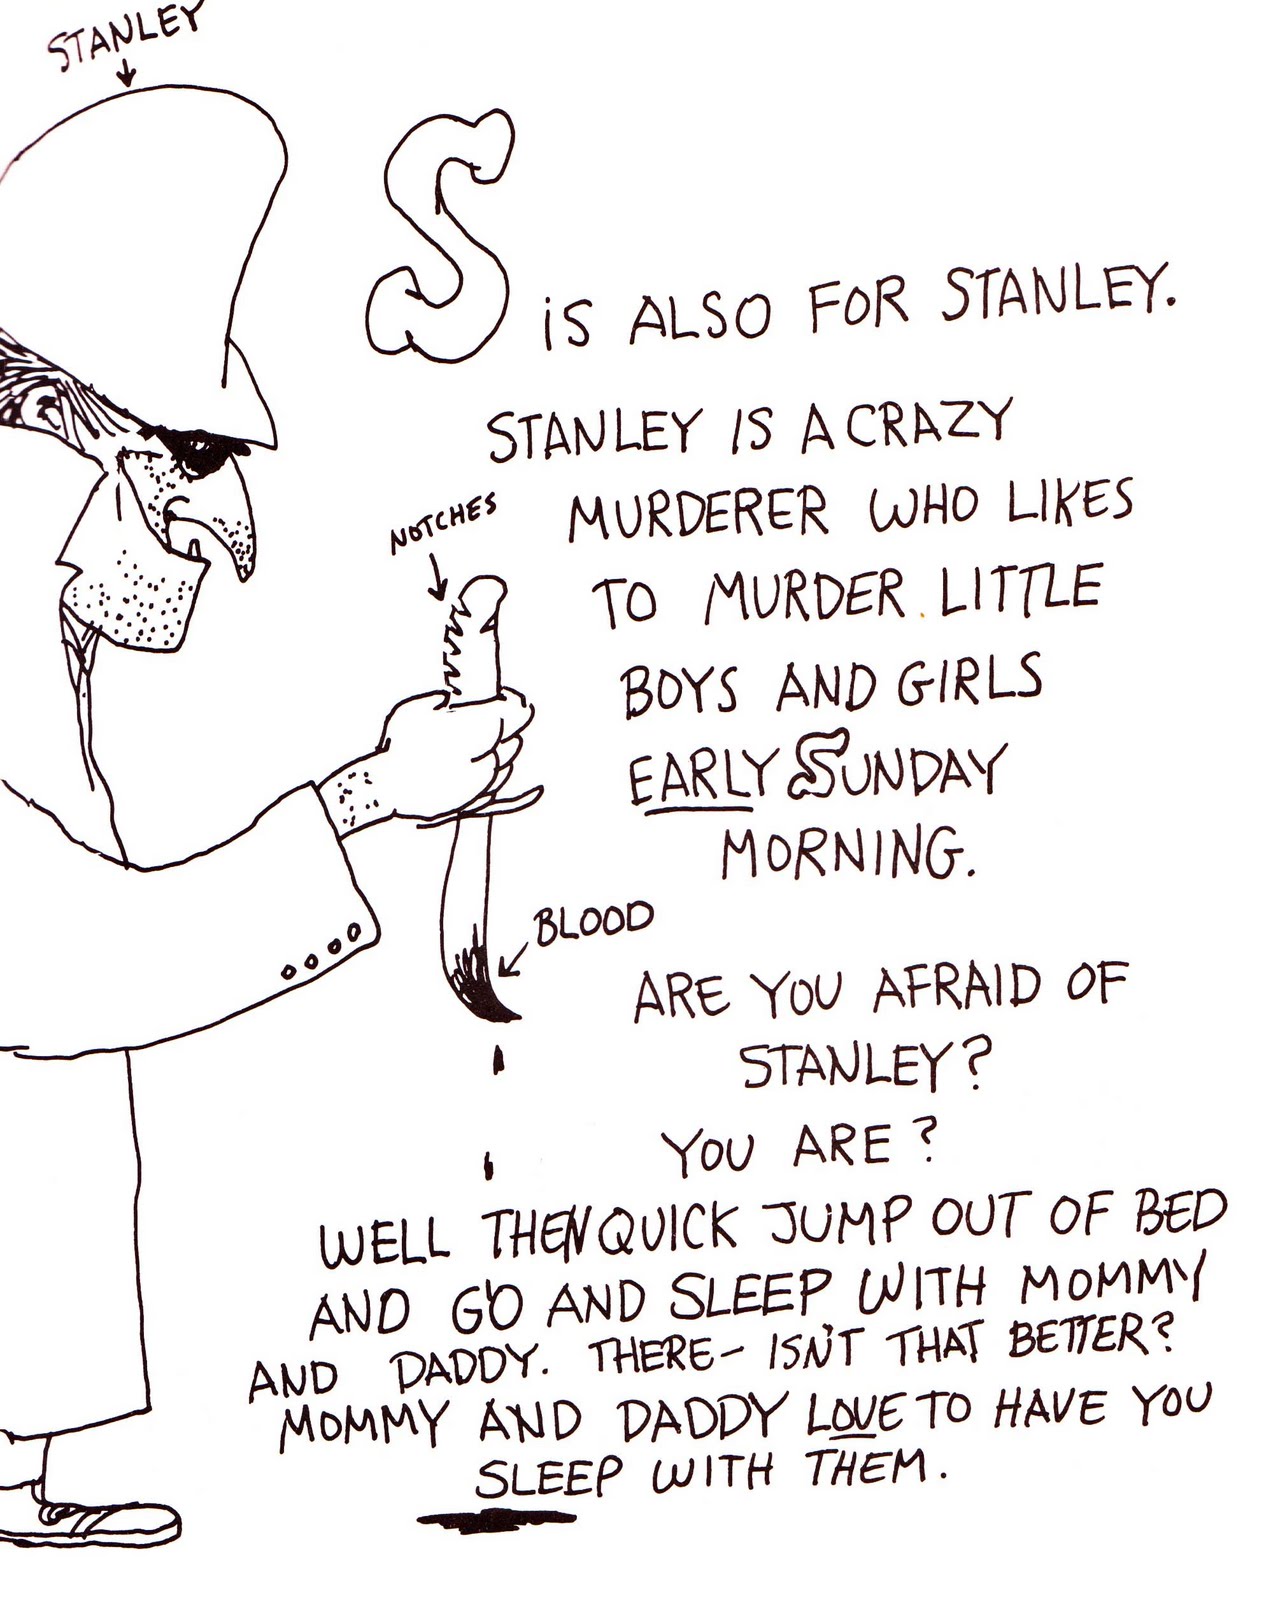 Vintage Kids' Books My Kid Loves: Uncle Shelby's ABZ Book